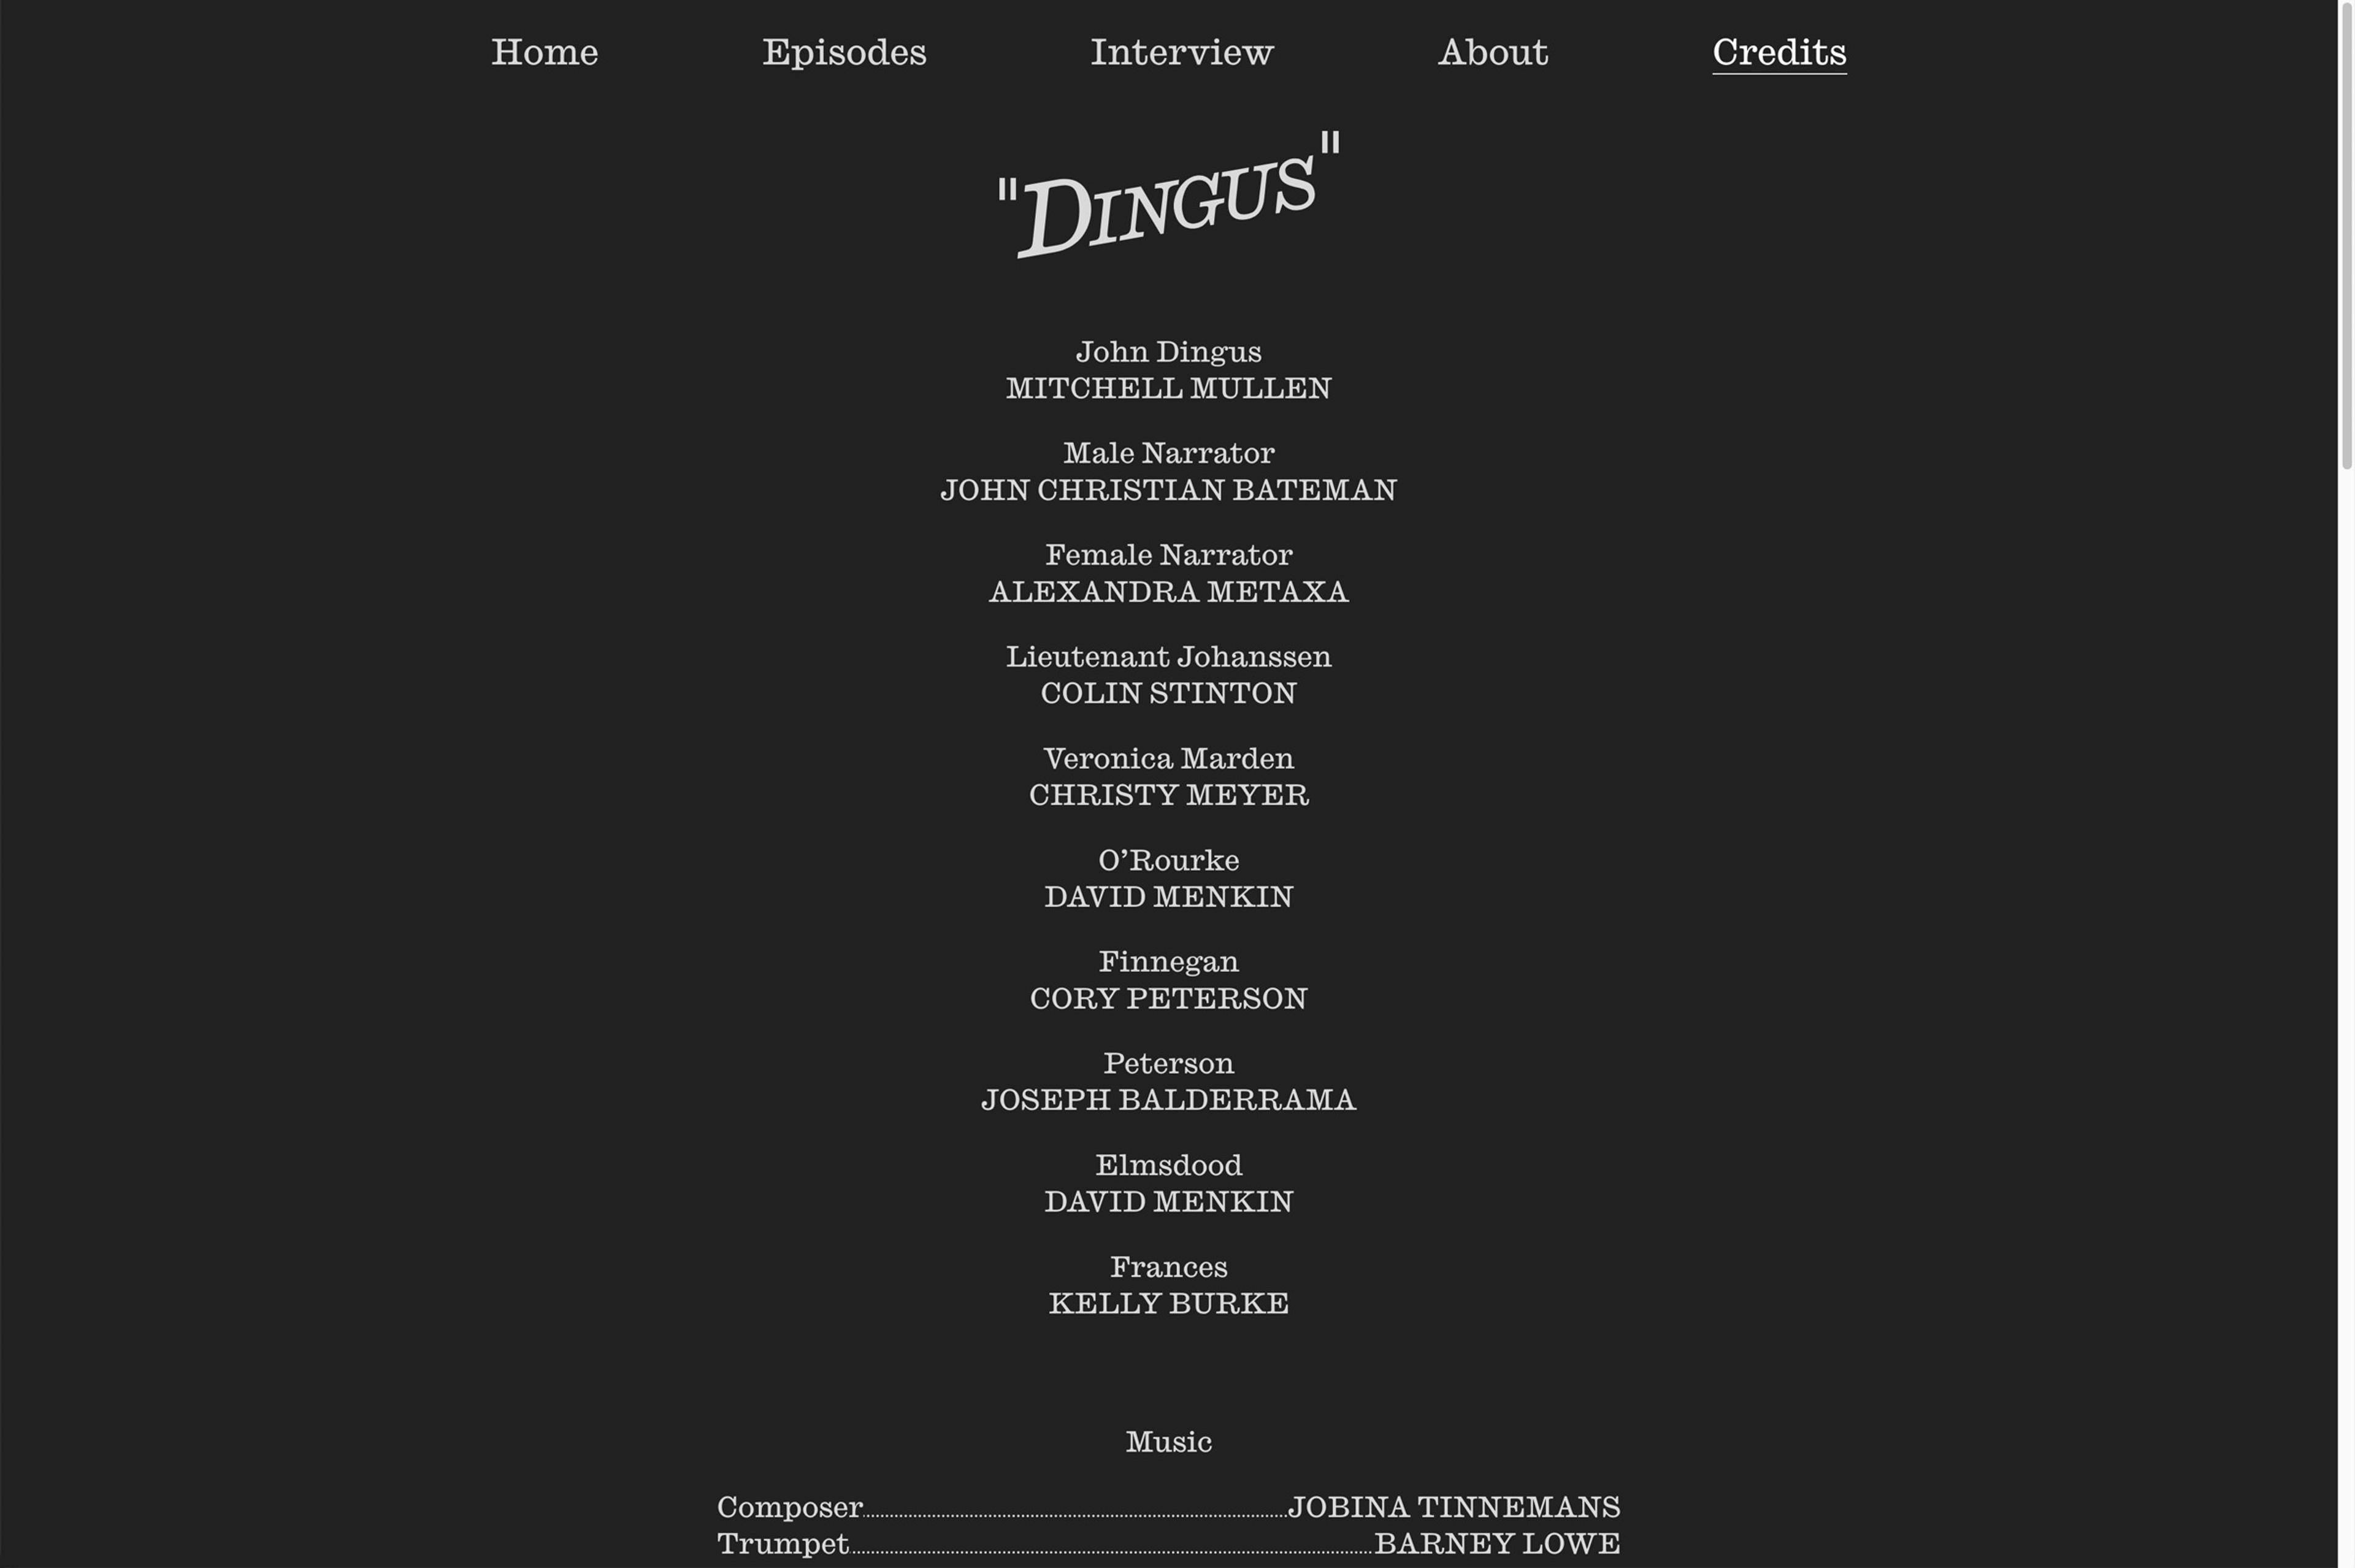 A screengrab from the Dingus website credits page, showing a centre-aligned list of production credits